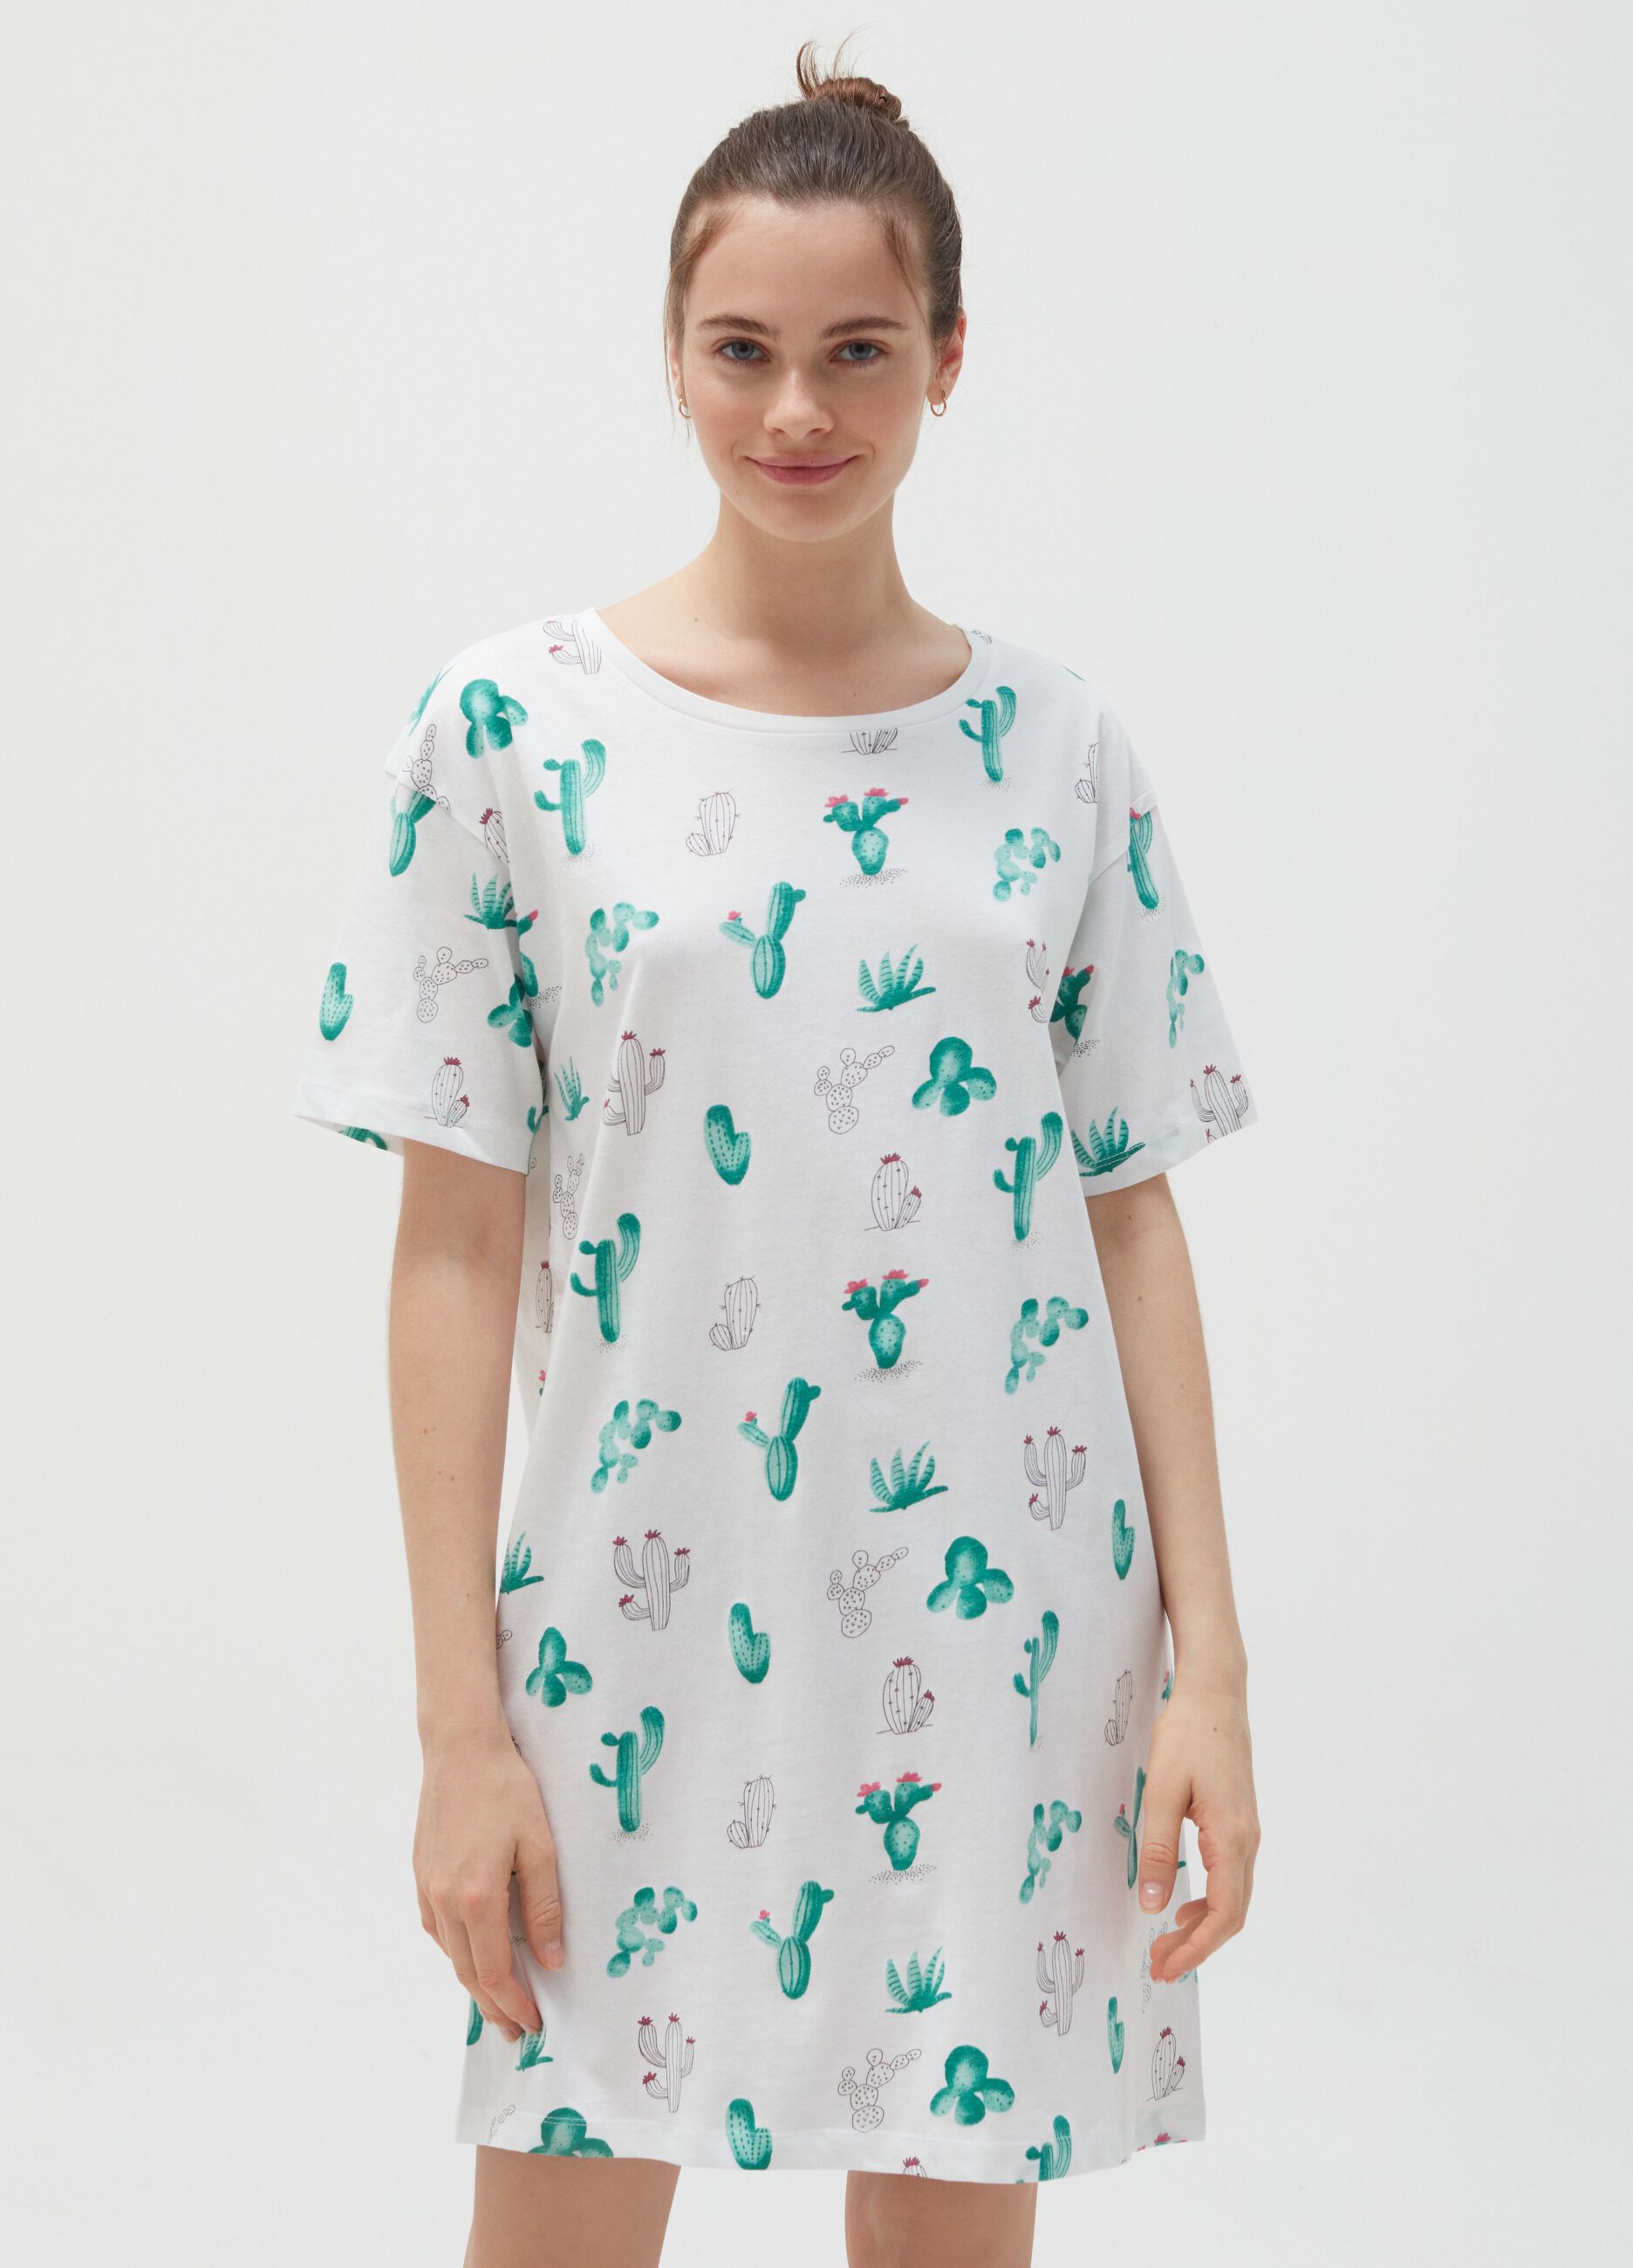 Cotton nightdress with cactus pattern